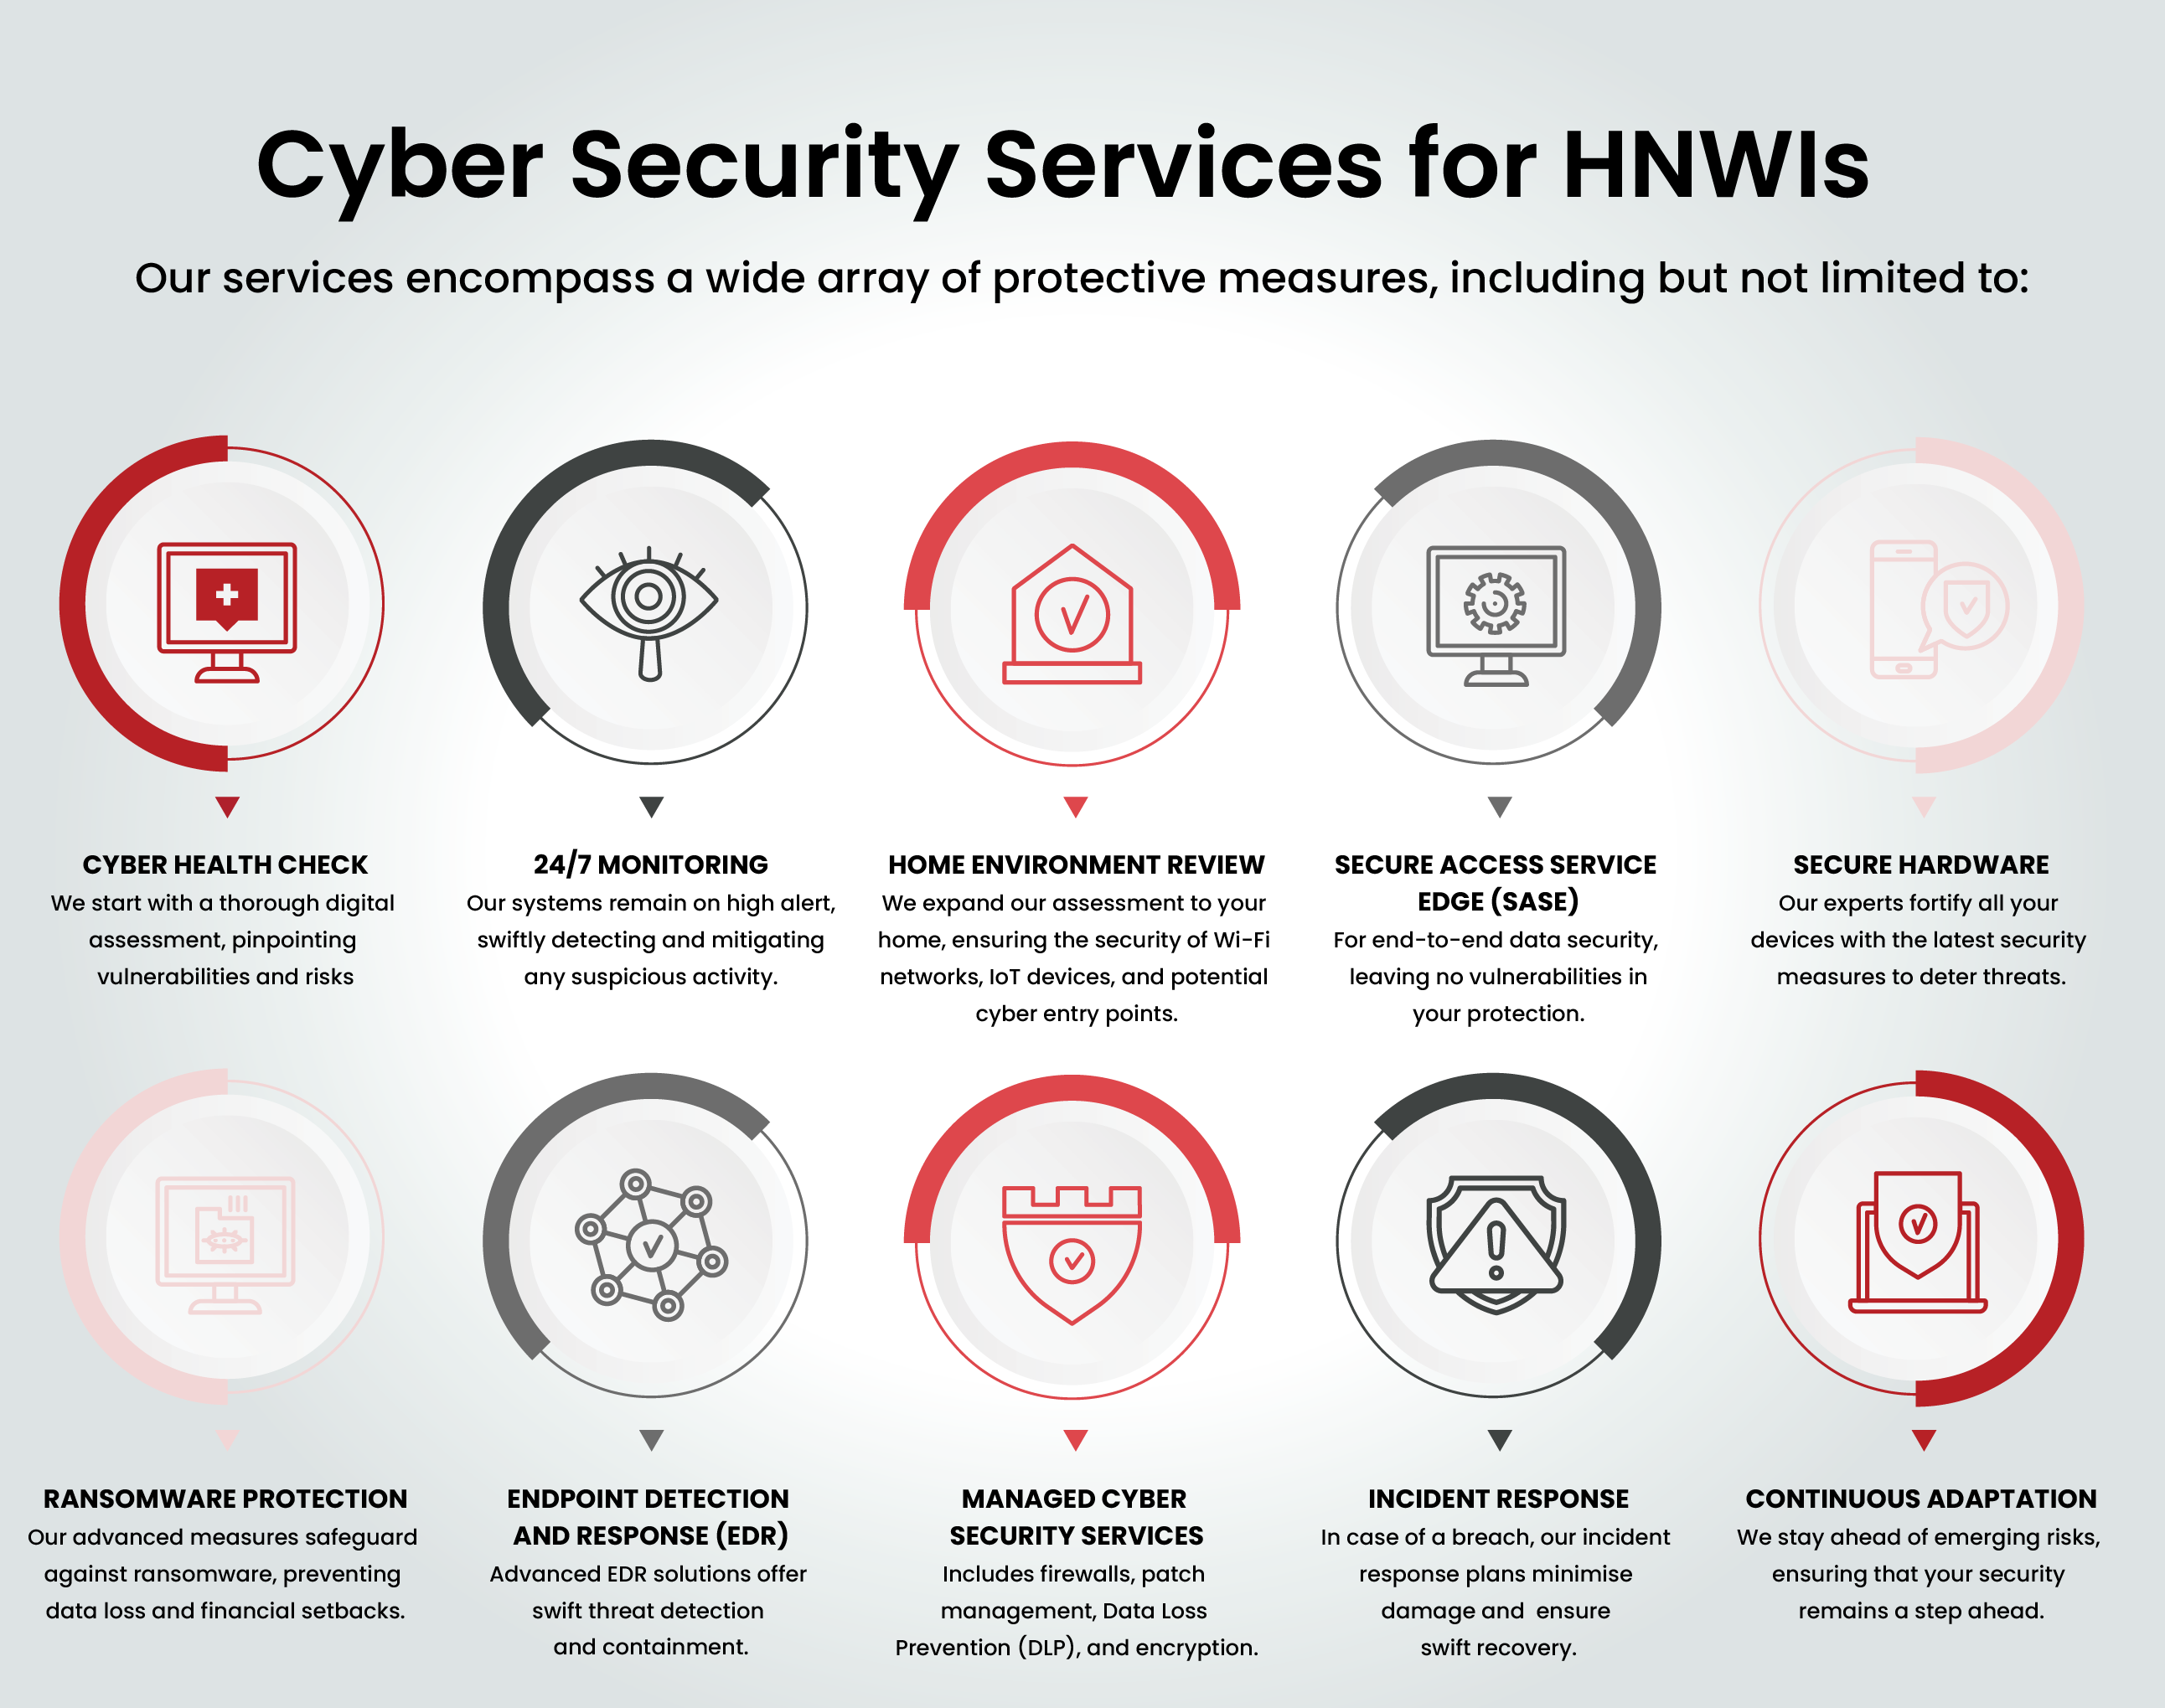 Personal Cyber Security Services for HNWIs